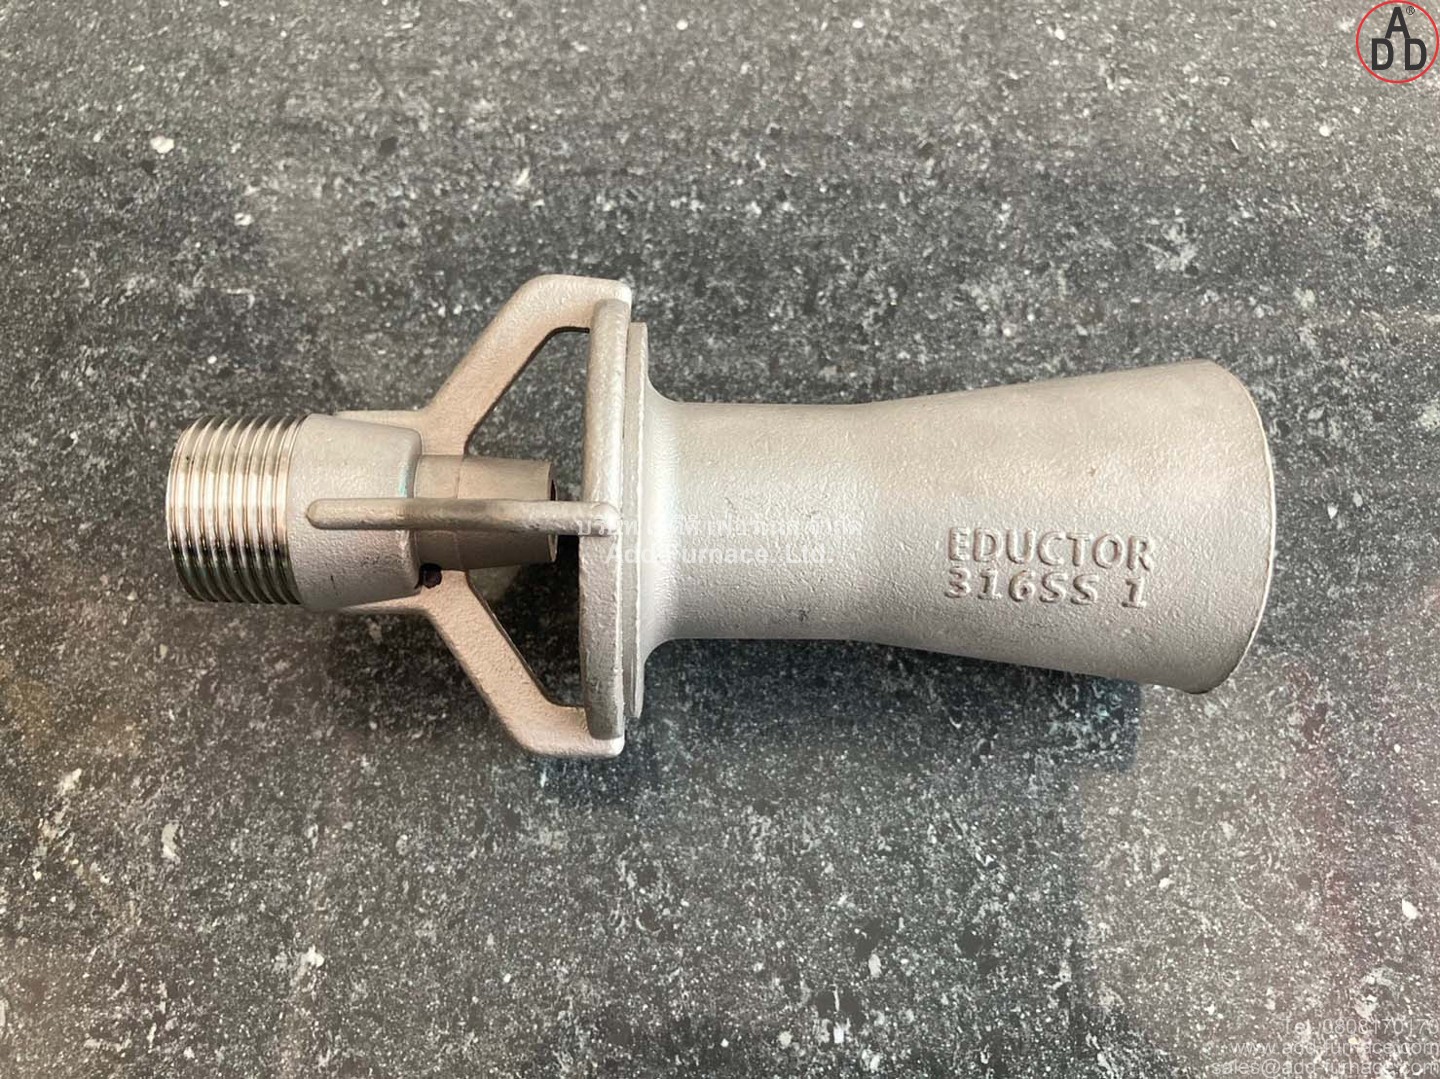 Eductor Mixing Nozzle 316SS 1 (1)